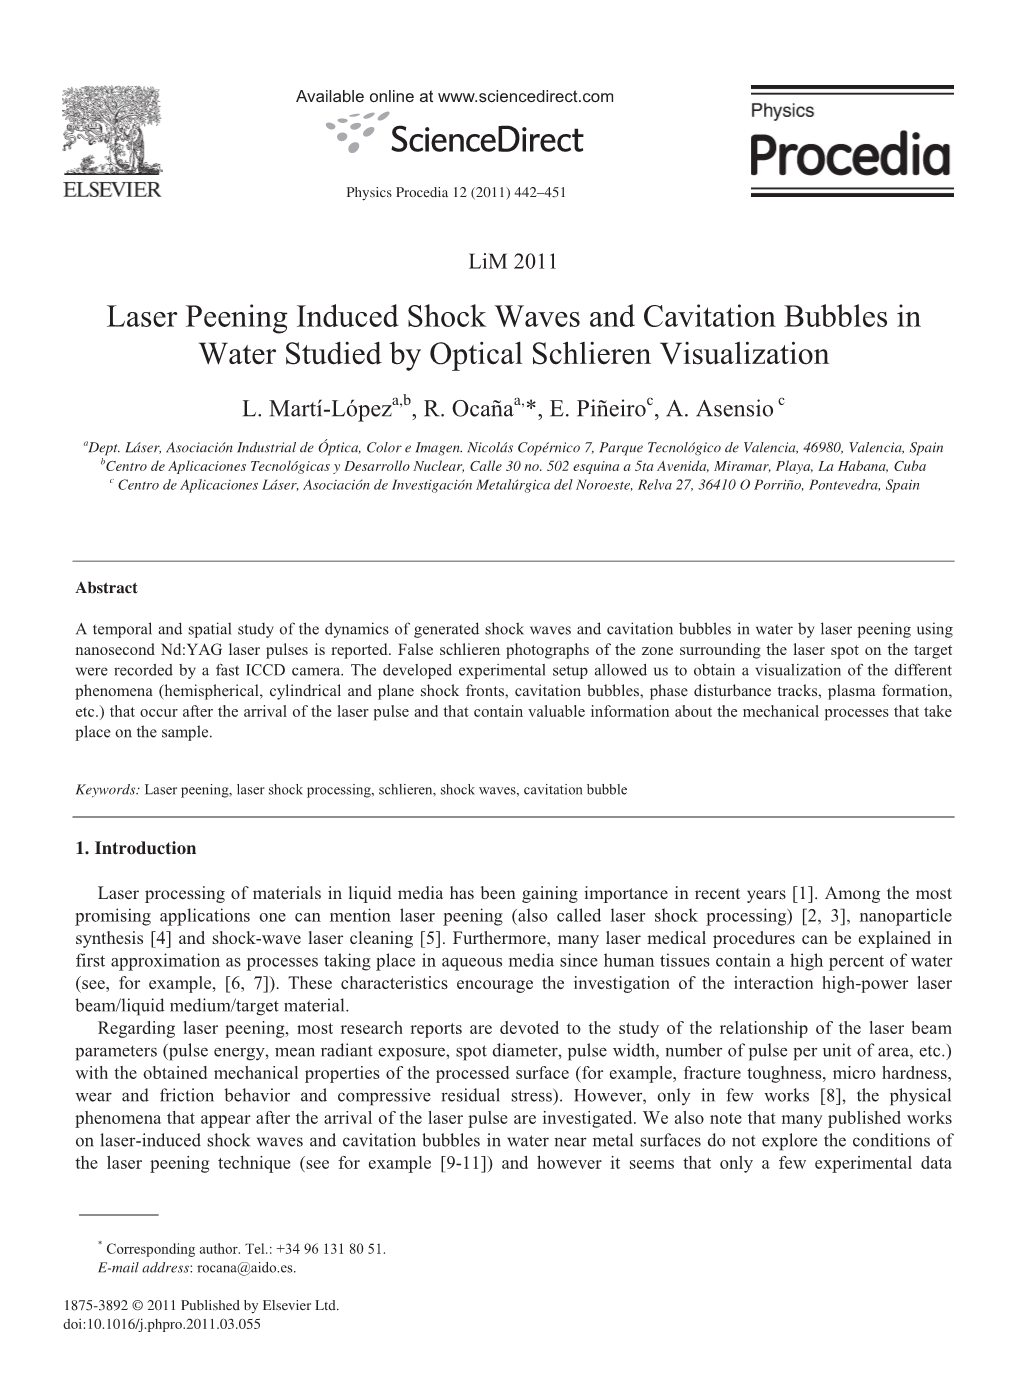 Laser Peening Induced Shock Waves and Cavitation Bubbles in Water Studied by Optical Schlieren Visualization